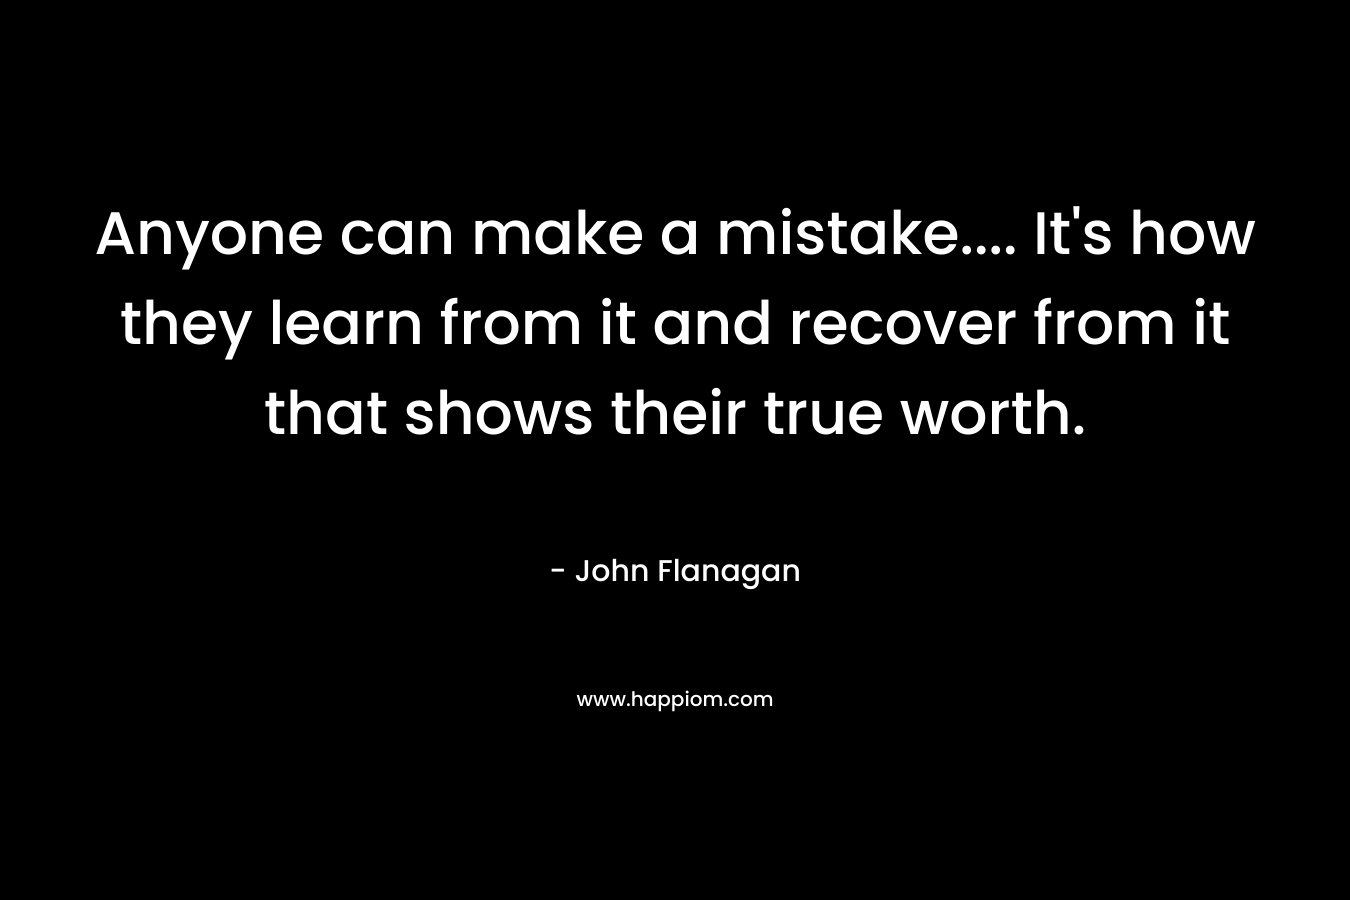 Anyone can make a mistake.... It's how they learn from it and recover from it that shows their true worth.